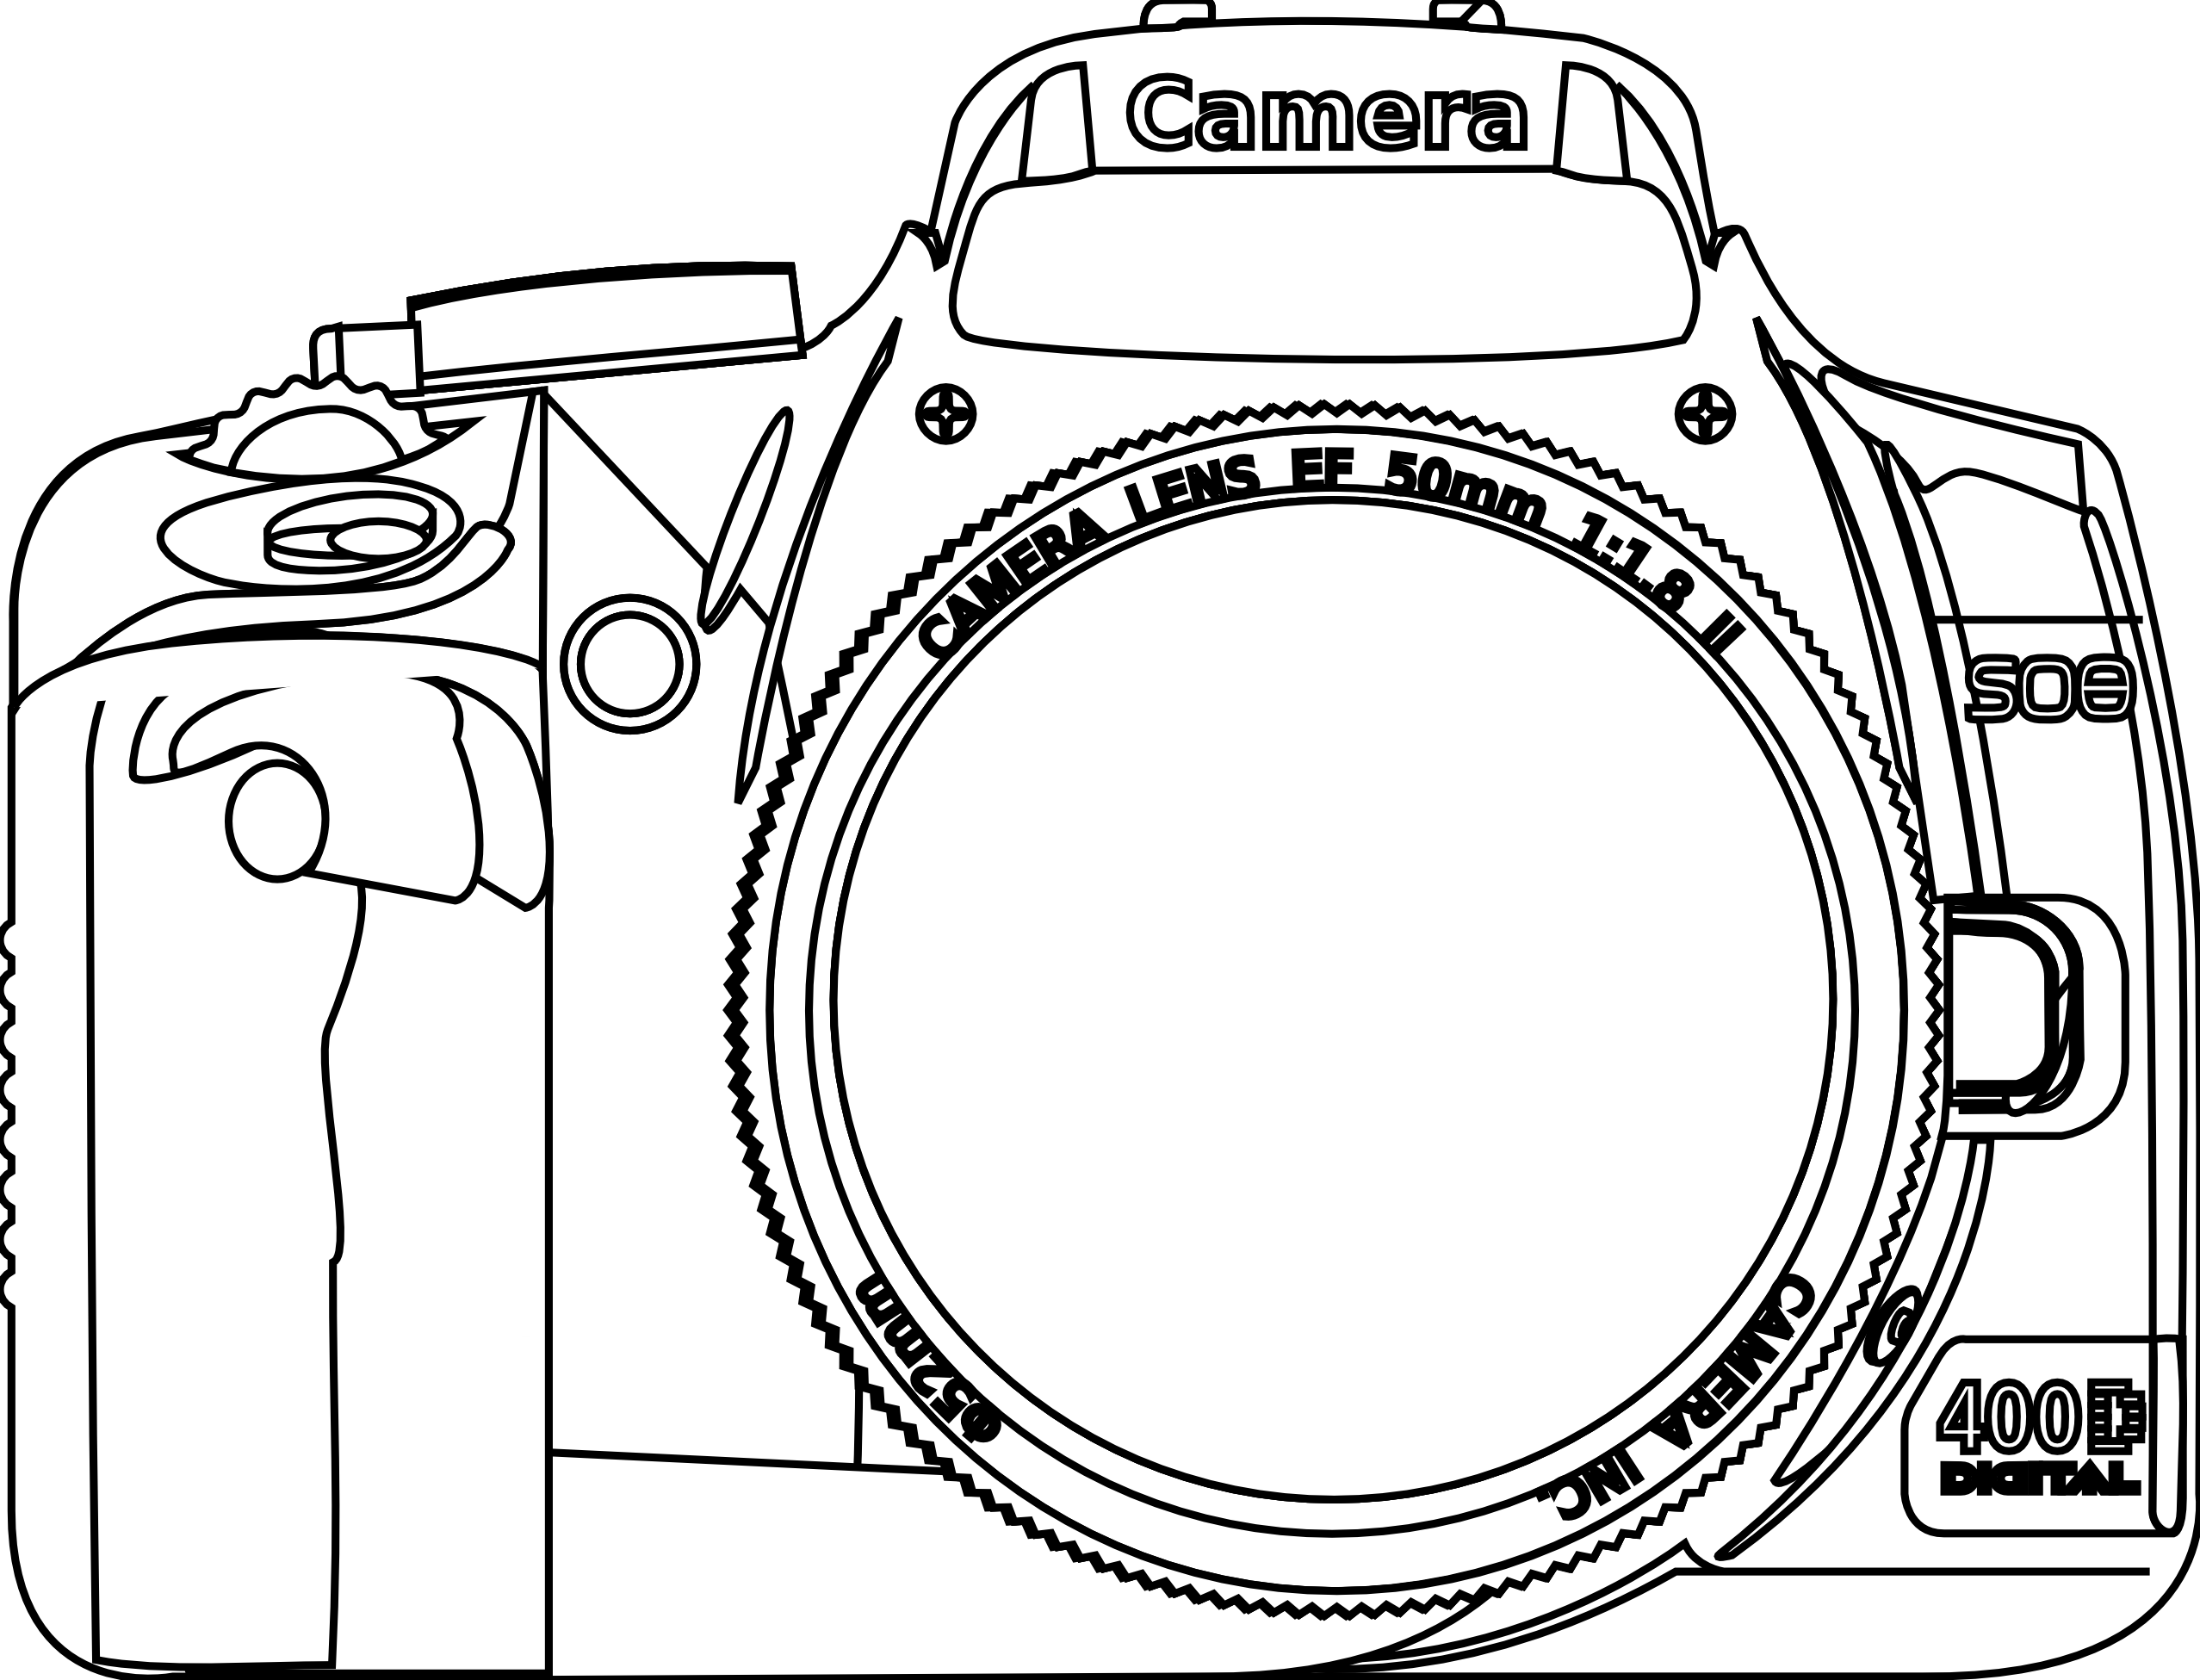 Yearbook clipart colorful camera. Clip art google search